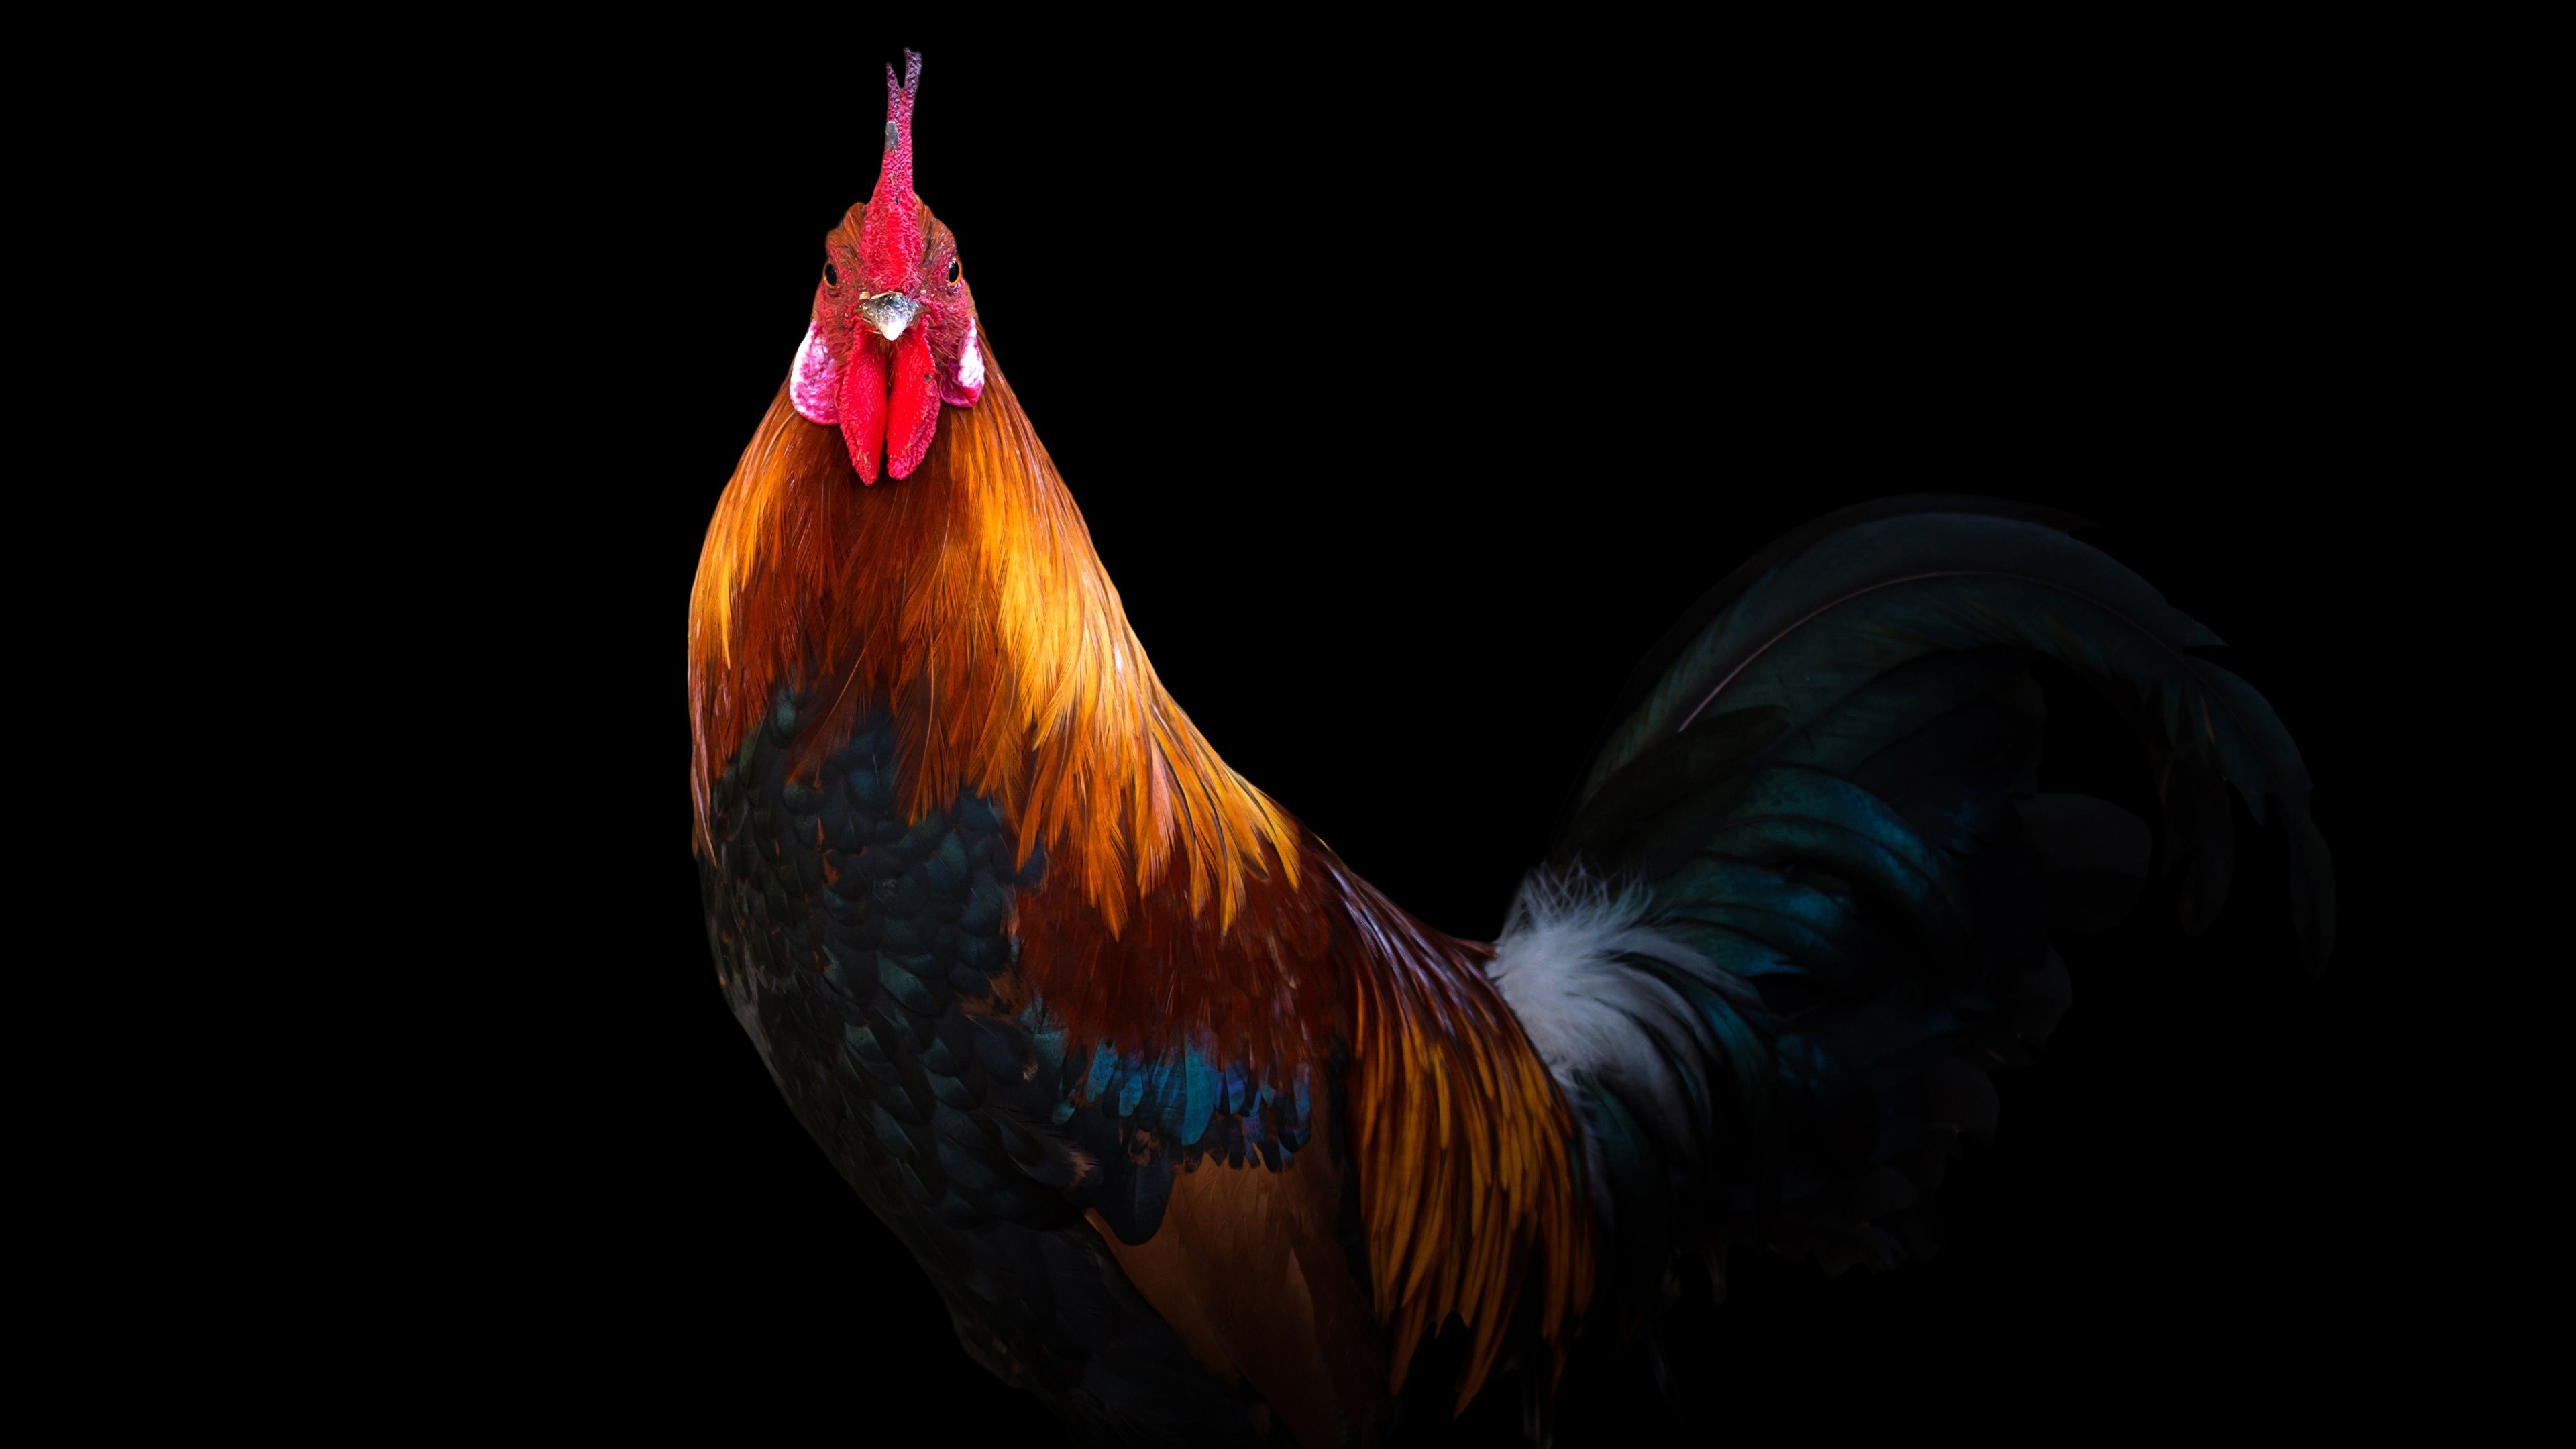 Rooster wallpapers, Proud rulers, Country living, Rustic beauty, 3840x2160 4K Desktop